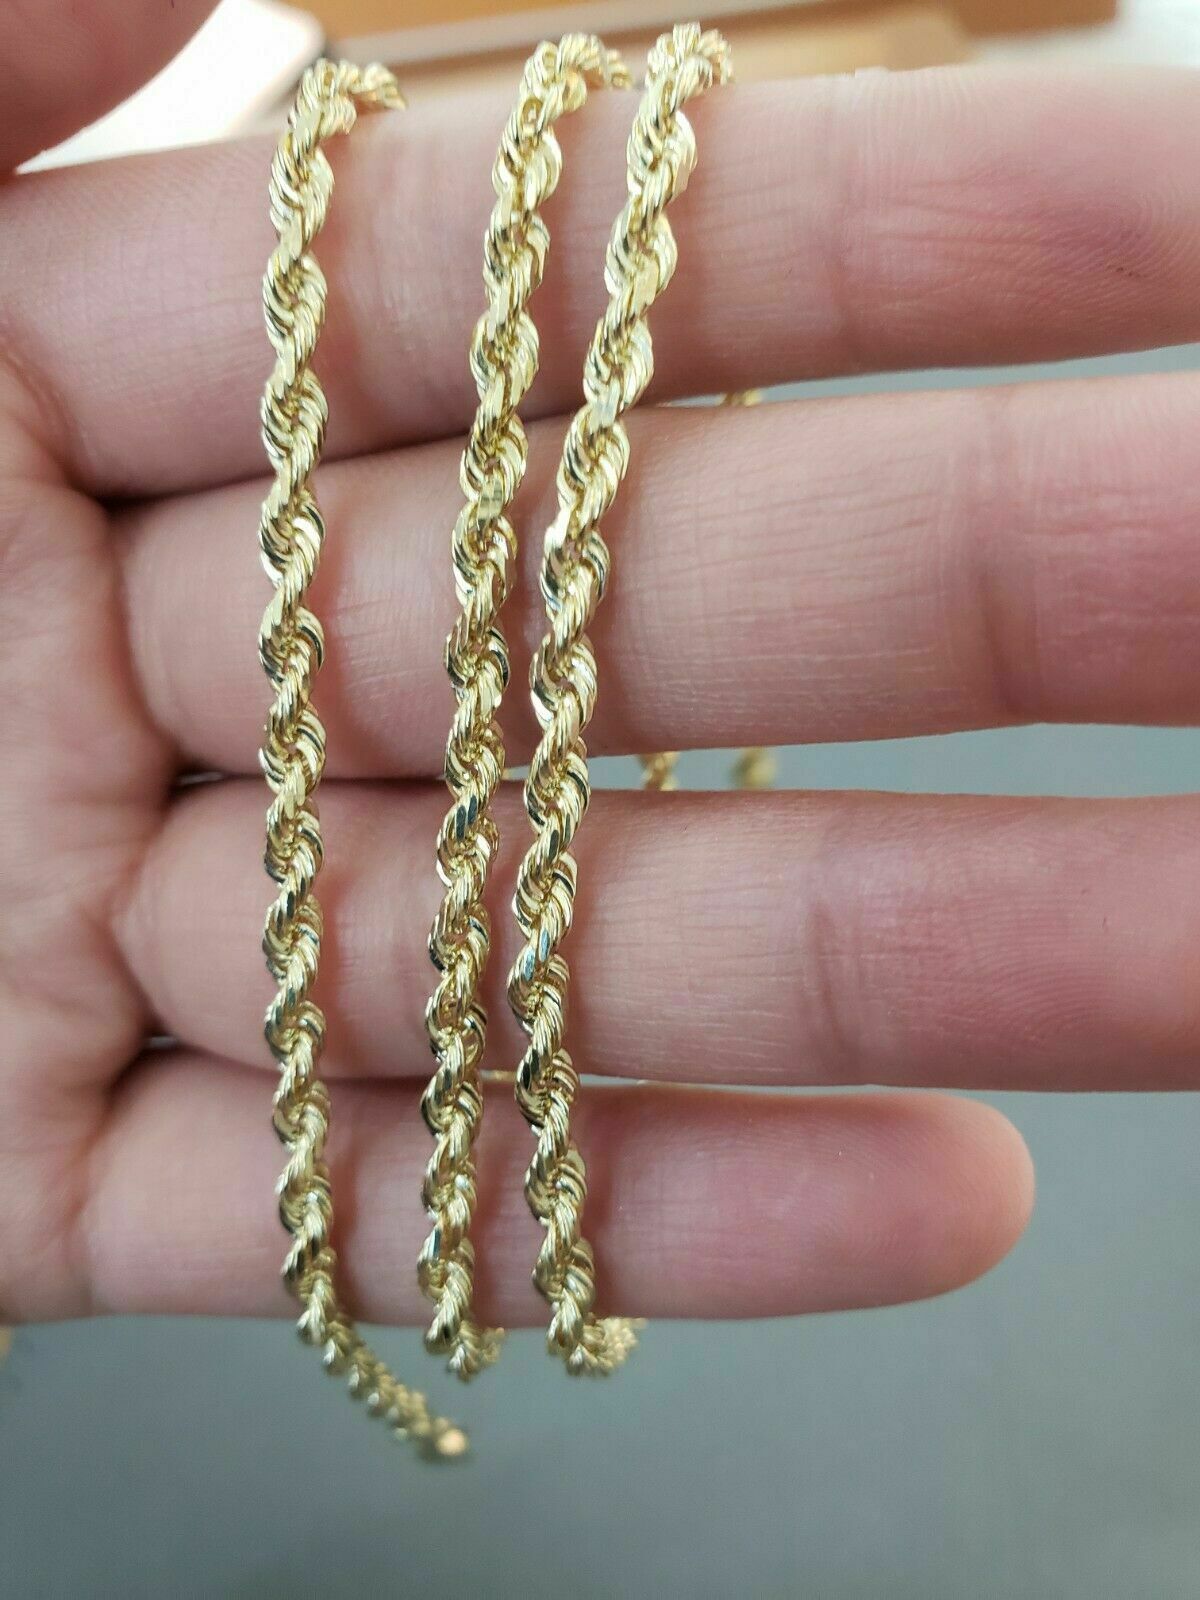 14k Solid Gold Rope Necklace Men Women Chain 2-4 mm 18-30 Inch REAL , Bracelets